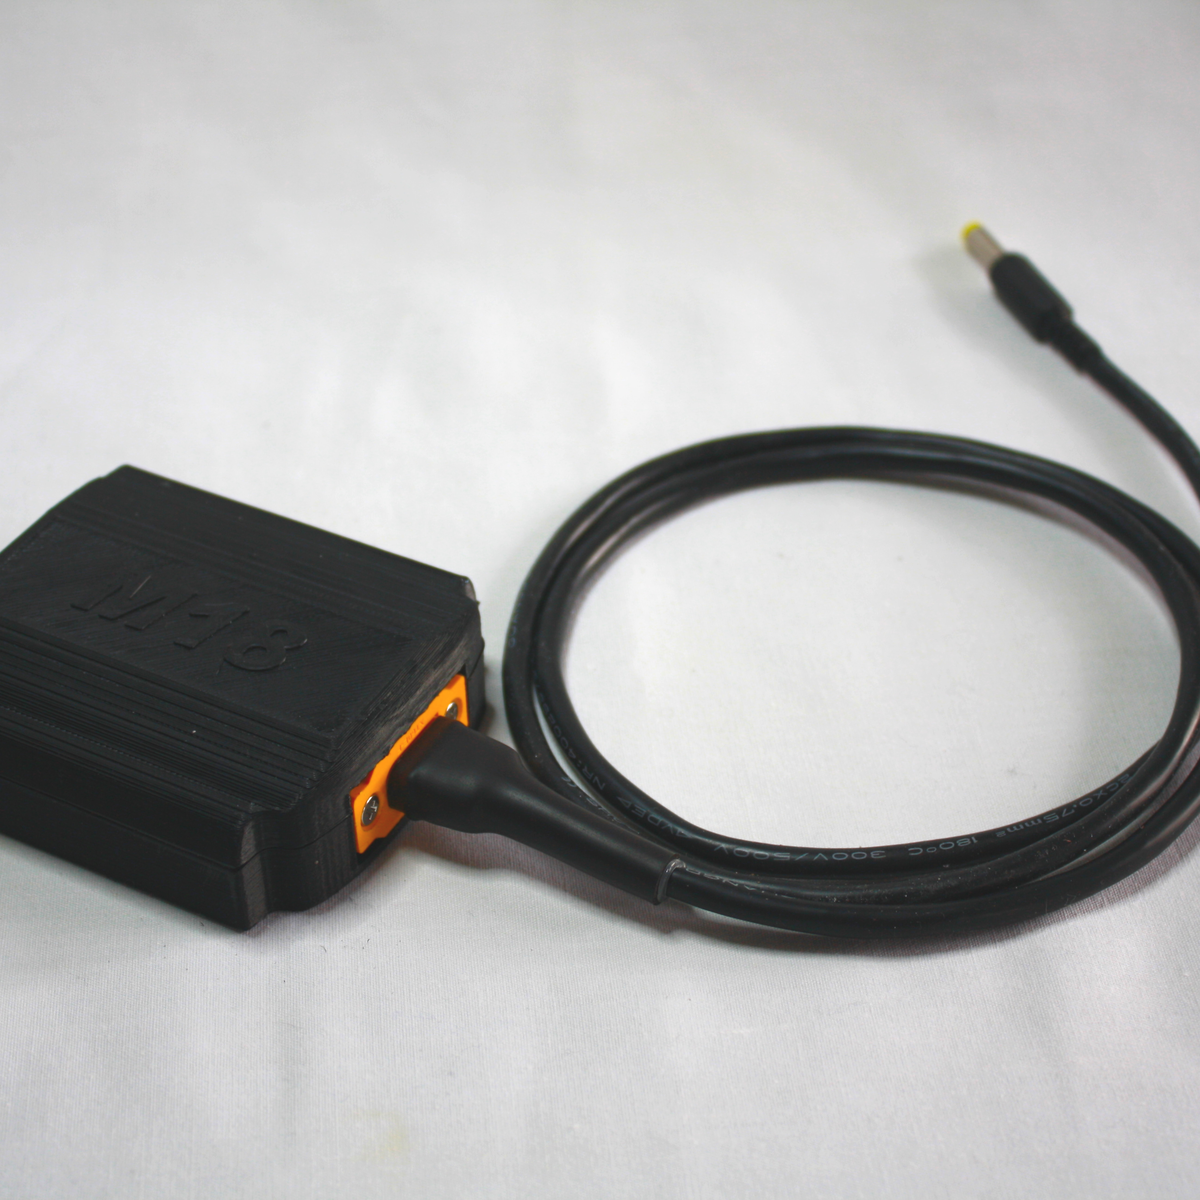 M18 Battery Adapter for Off-Grid Soldering. from ZygoMatic Tool Works on  Tindie